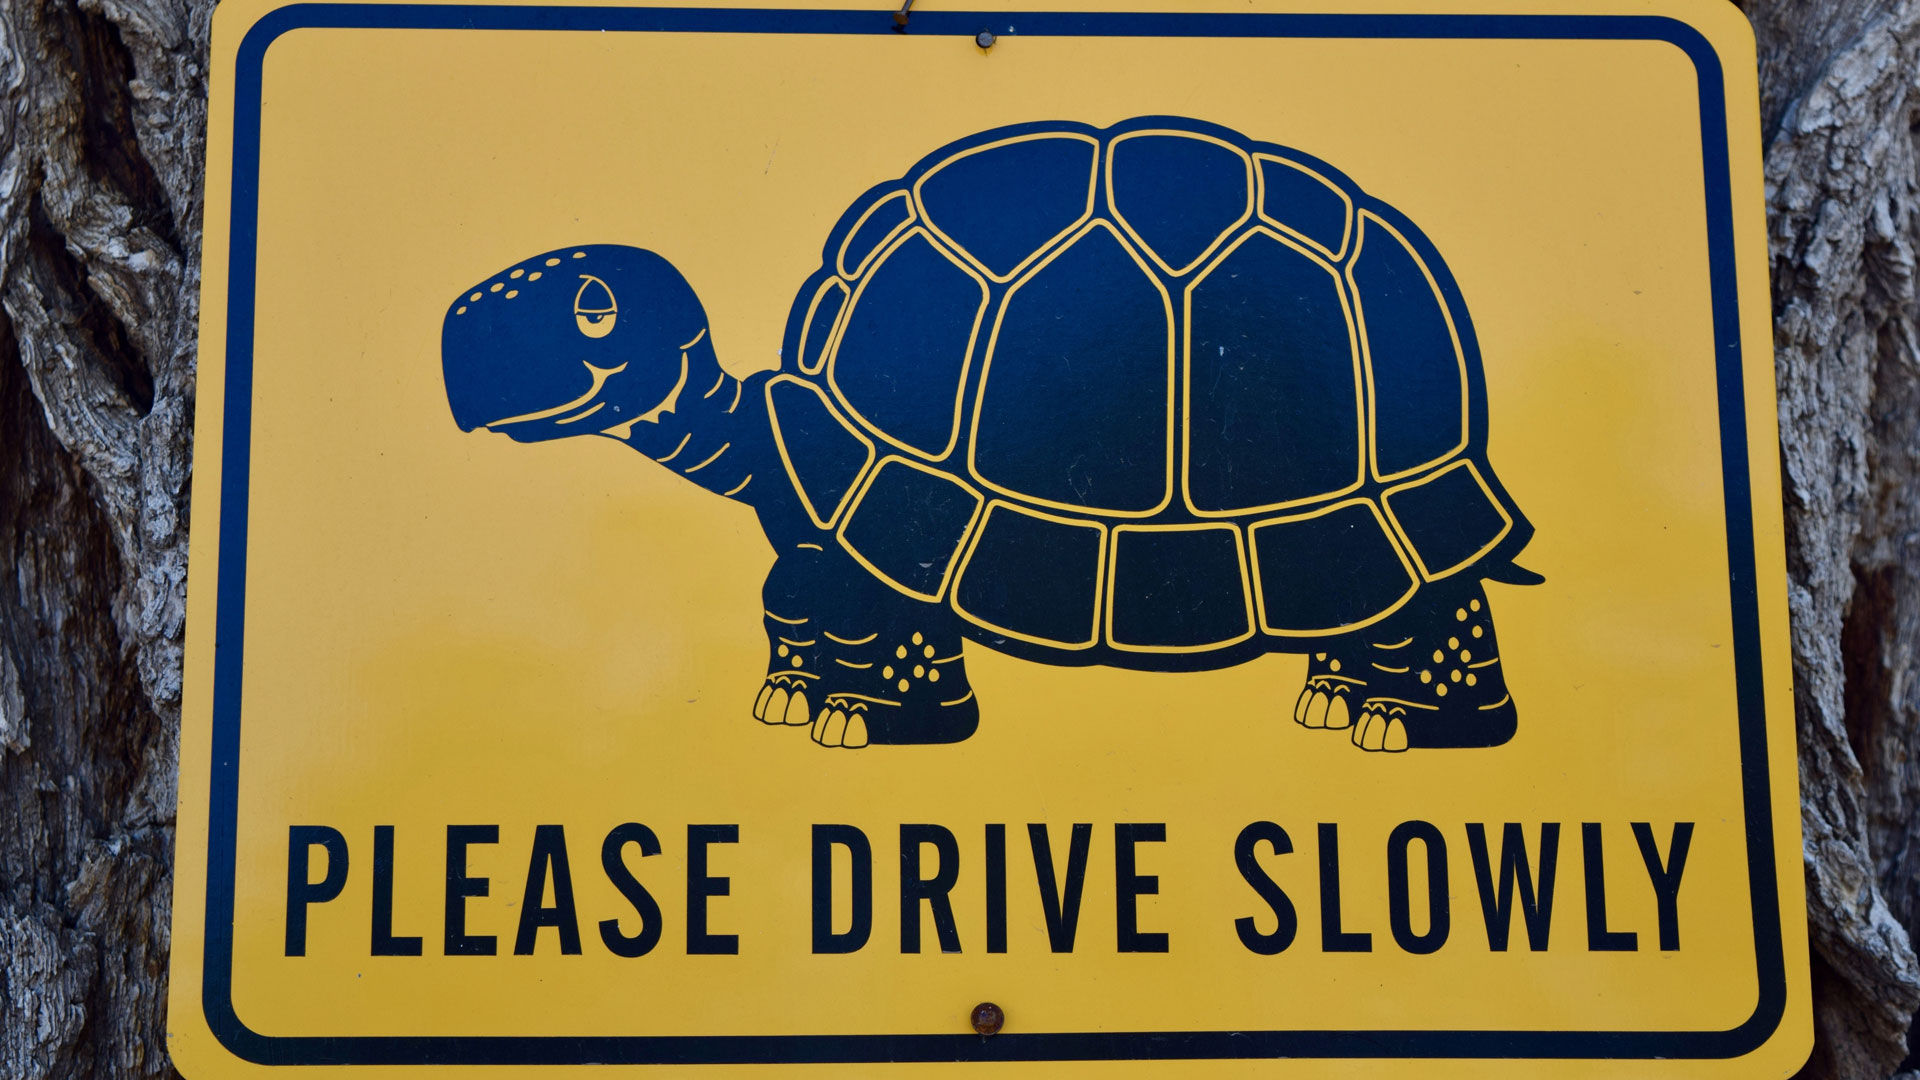 Going slow